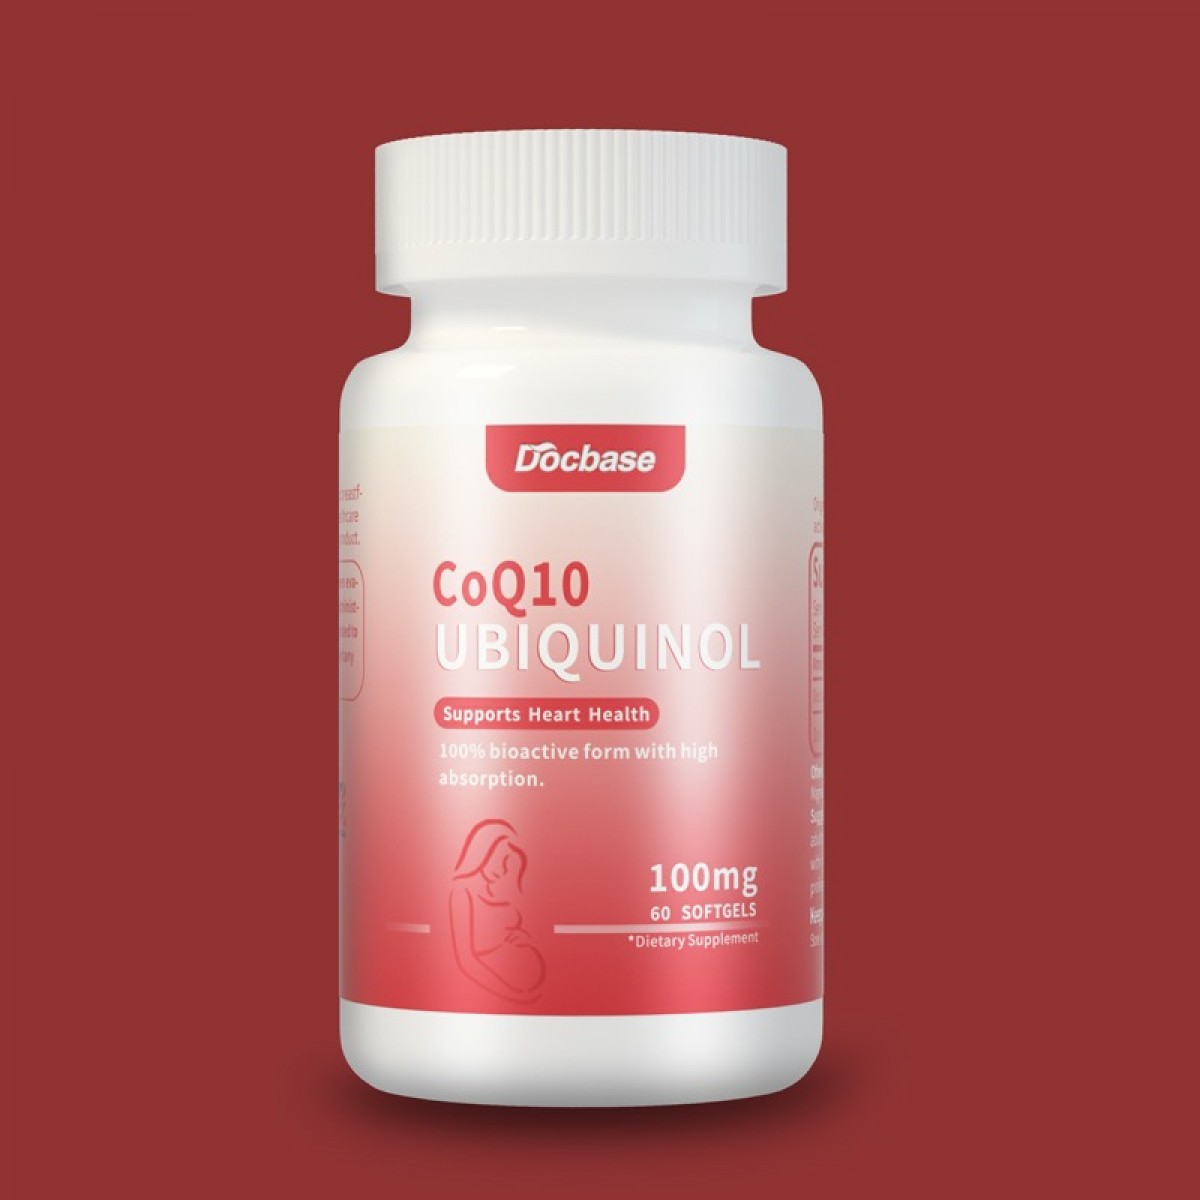 Docbase|Coenzyme Q10 capsule|supports he